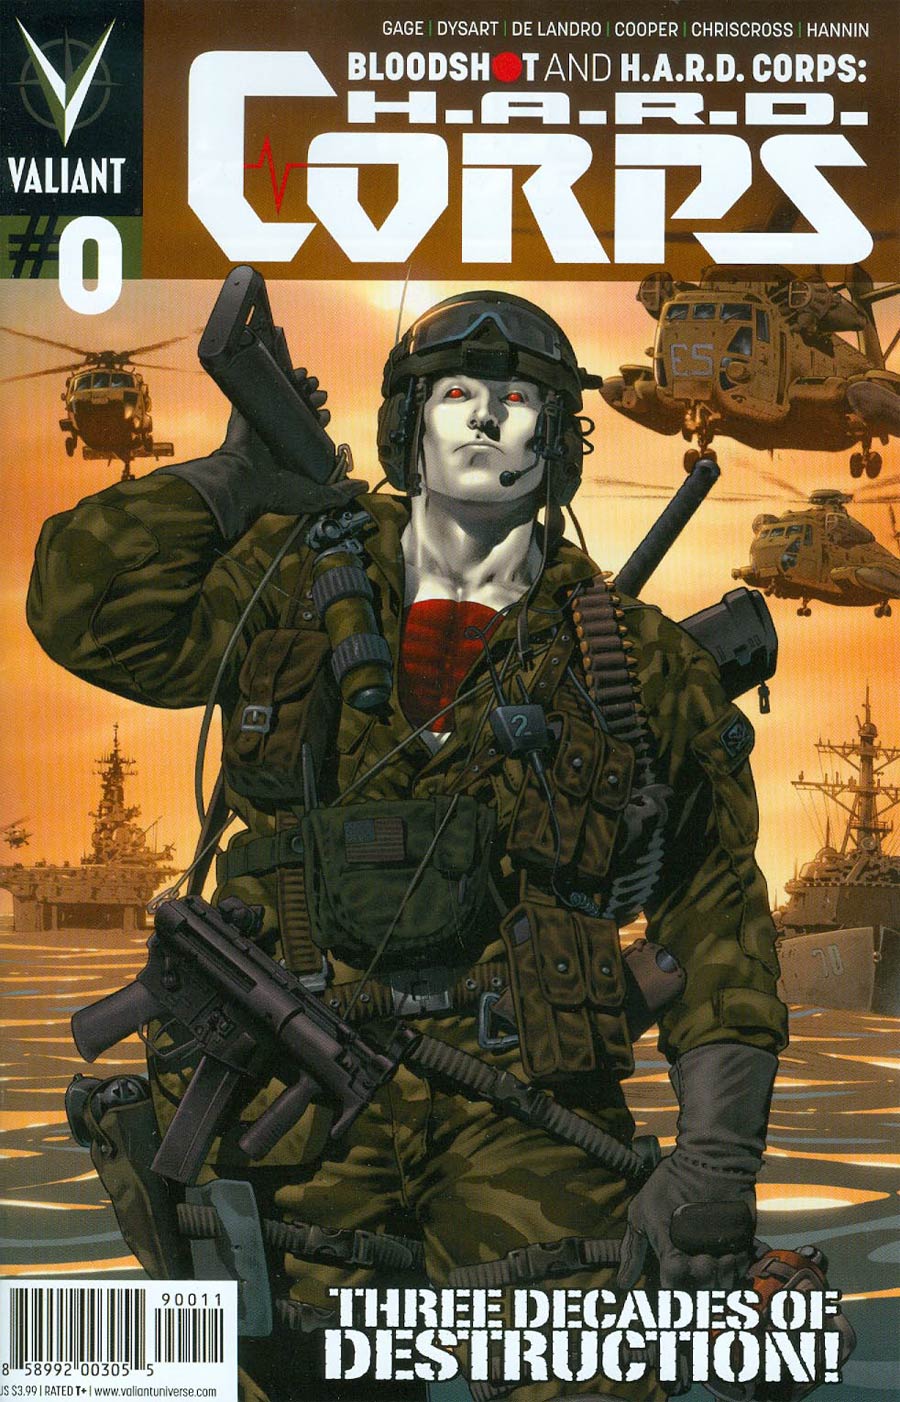 Bloodshot And H.A.R.D. Corps H.A.R.D. Corps #0.2014 Cover A Regular Arturo Lozzi Cover